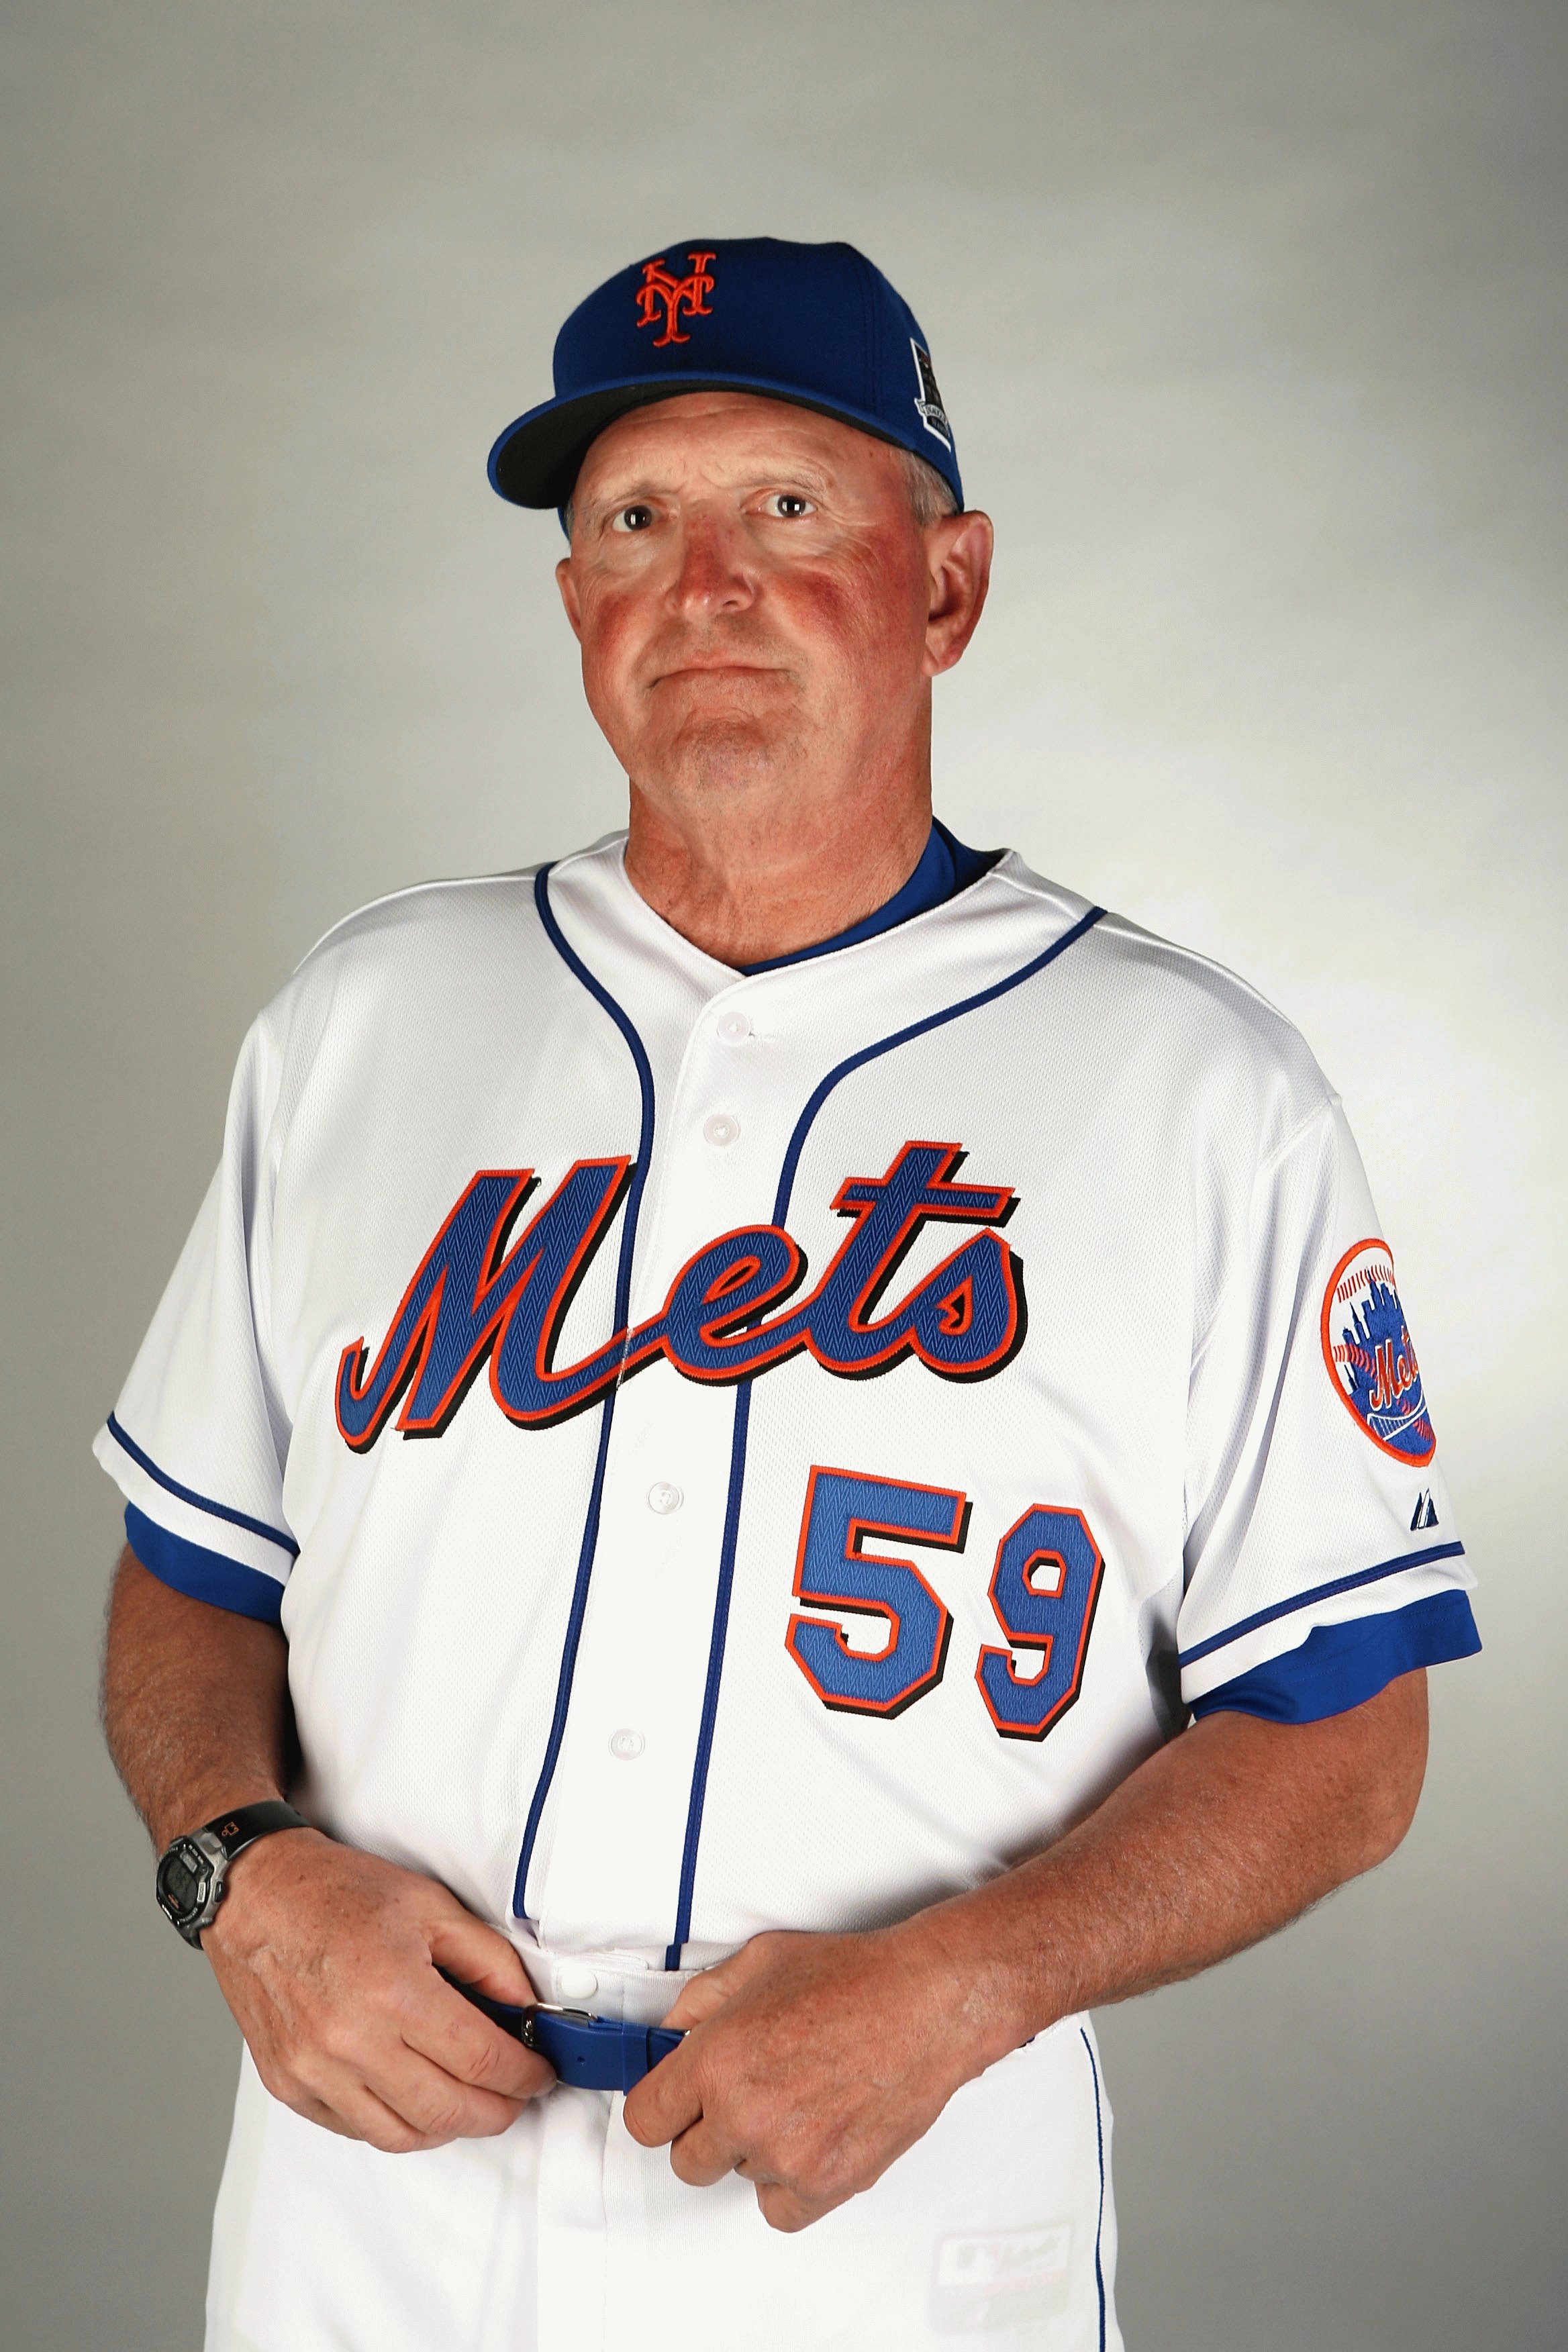 PORT SAINT LUCIE, FL - FEBRUARY 23:  Coach Dan Warthen #59 of the New York Mets poses during photo day at Tradition Field on February 23, 2009 in Port Saint Lucie, Florida.  (Photo by Doug Benc/Getty Images)